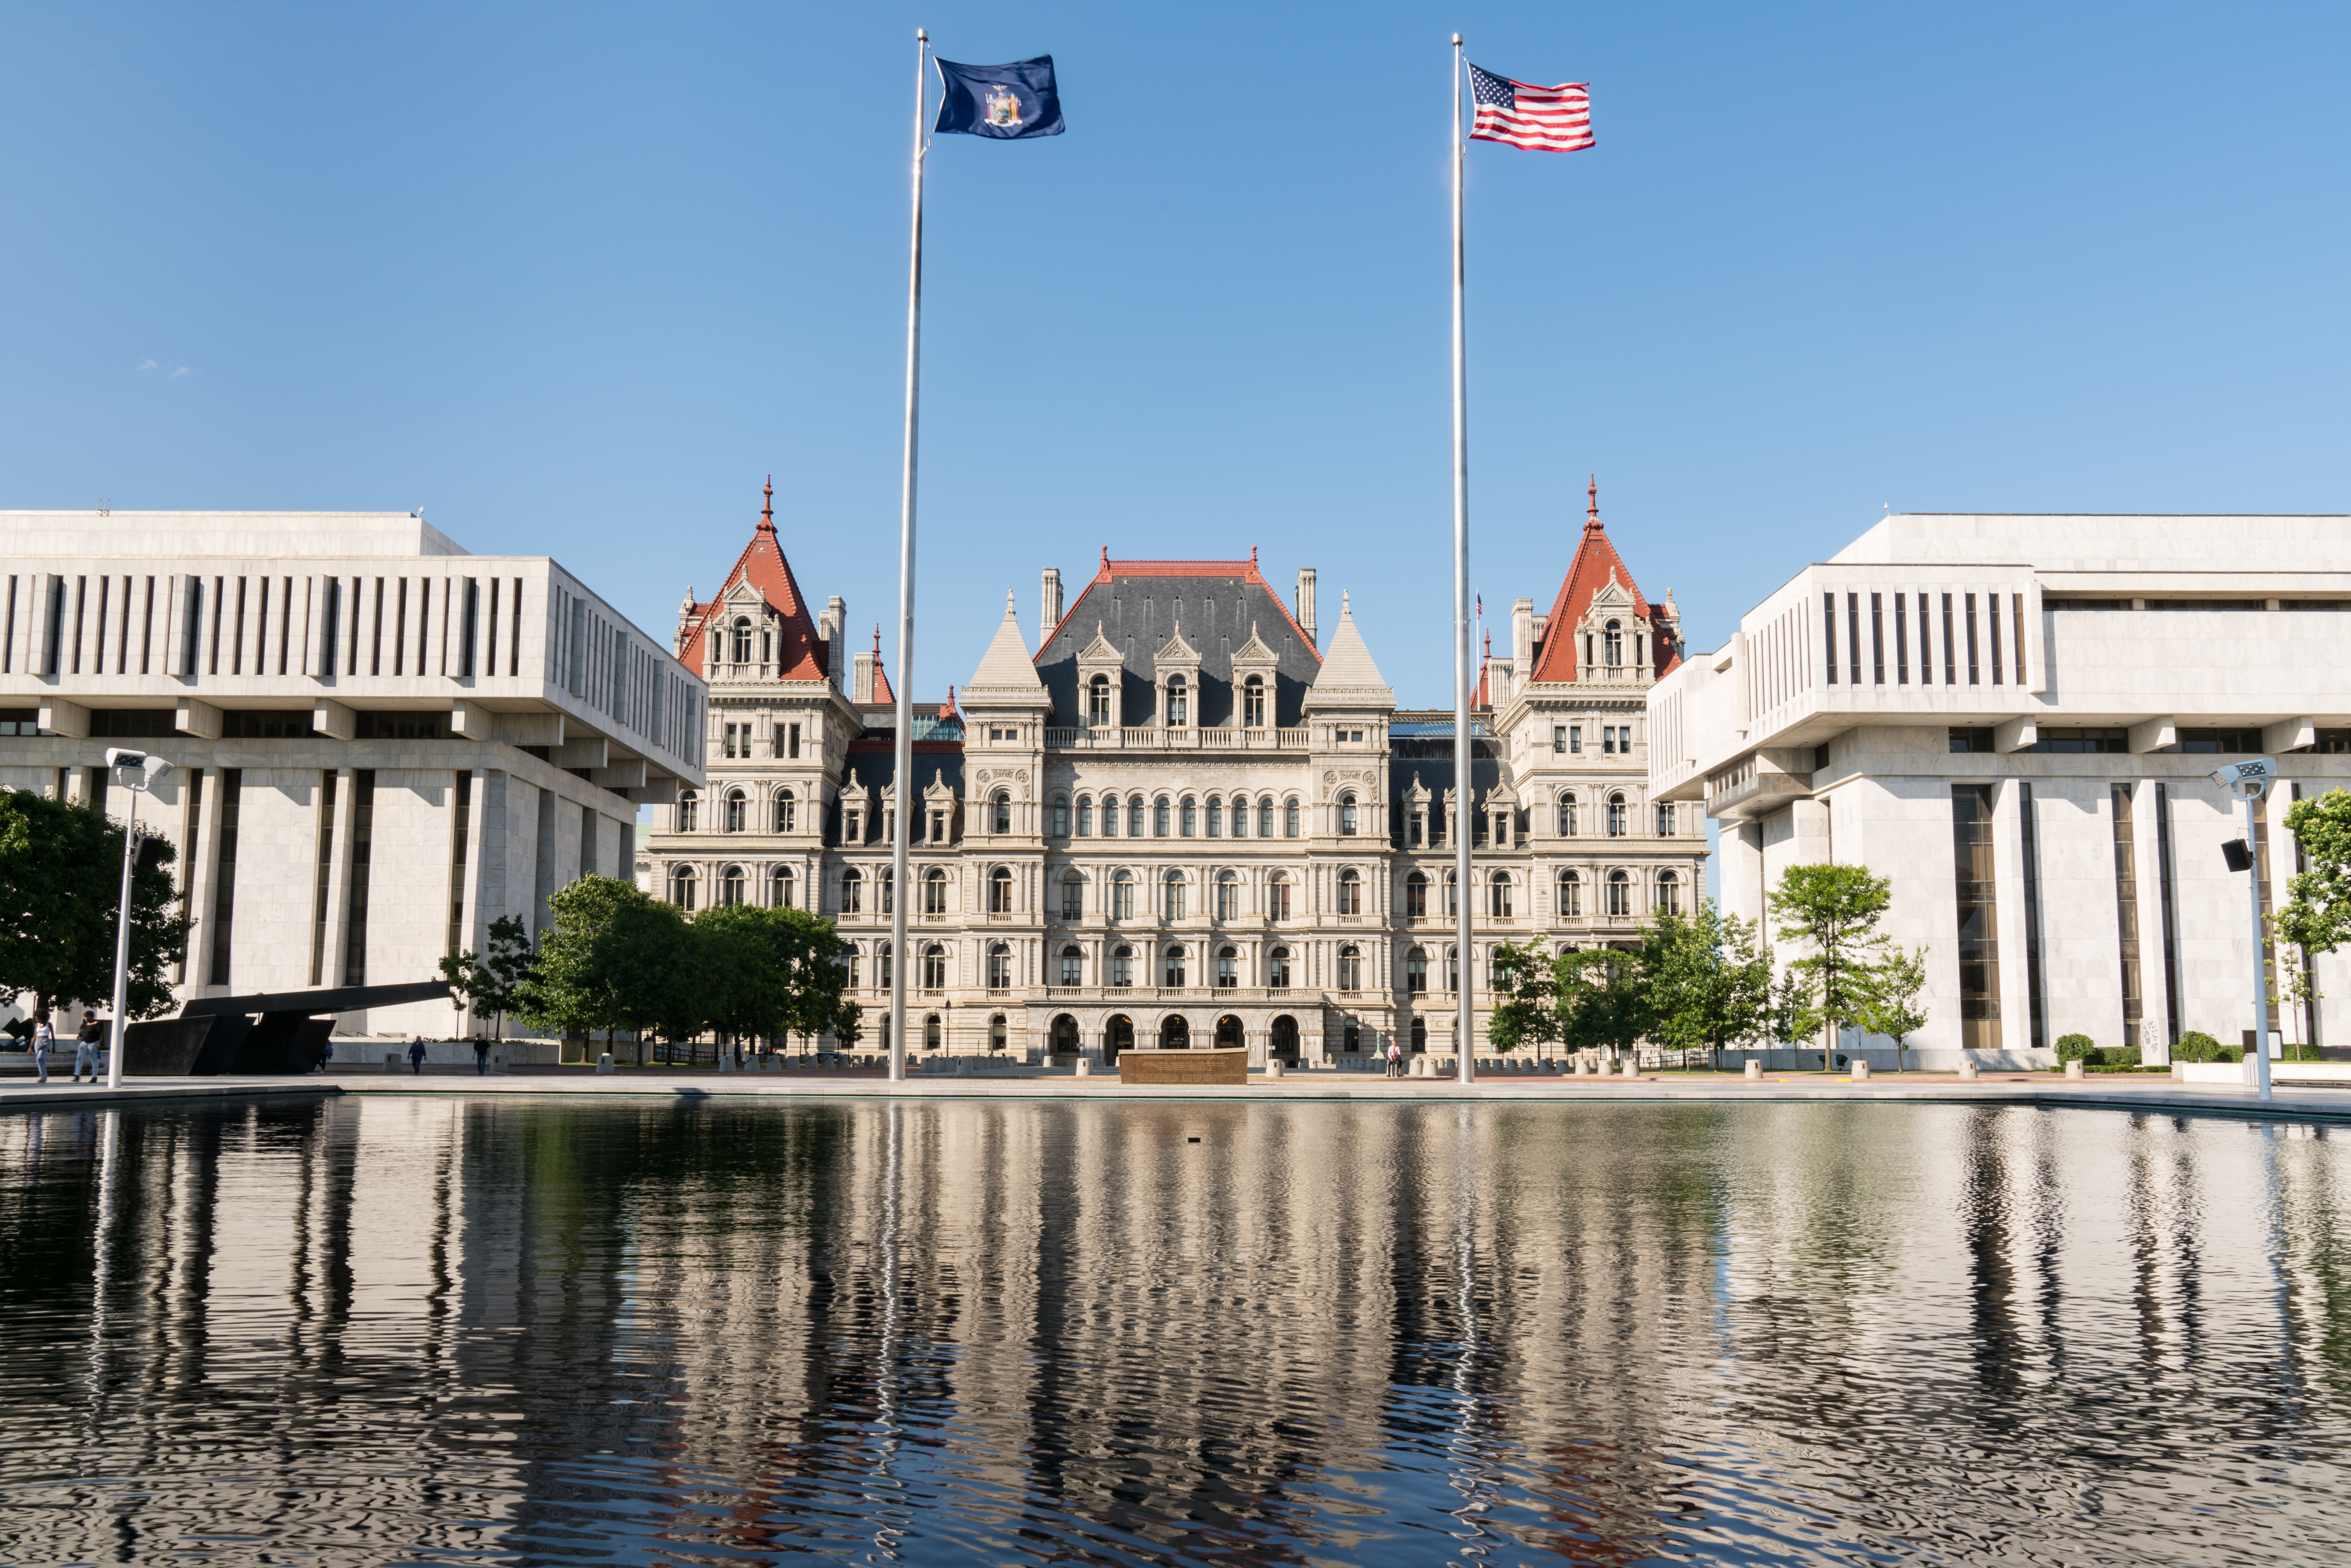 The New York state Capitol building in Albany, framed by two flags on each side.